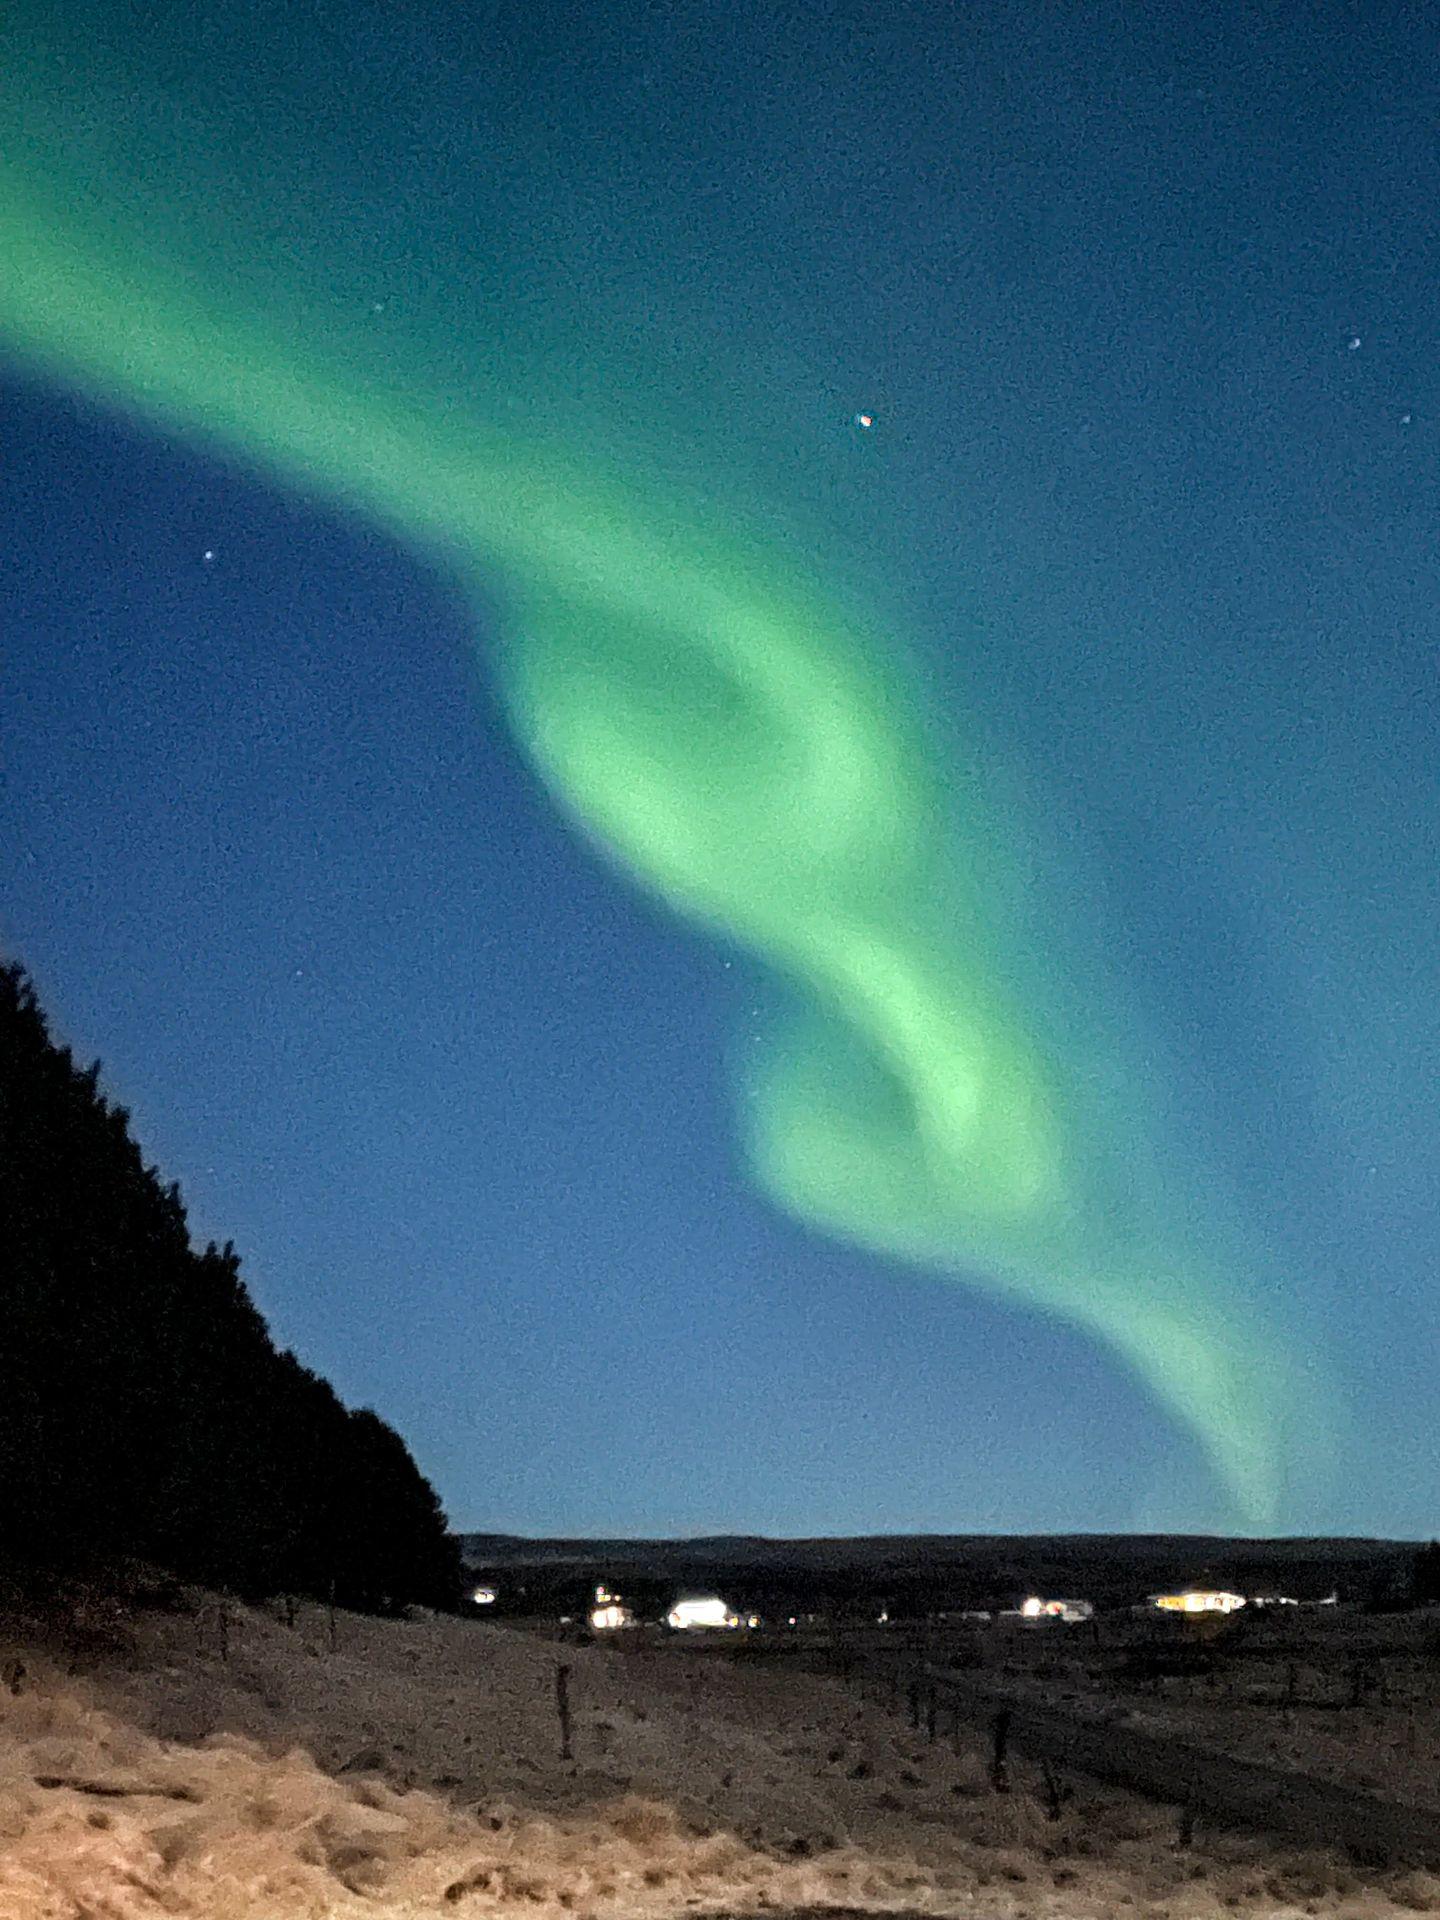 The Northern Lights twirling around in the sky.